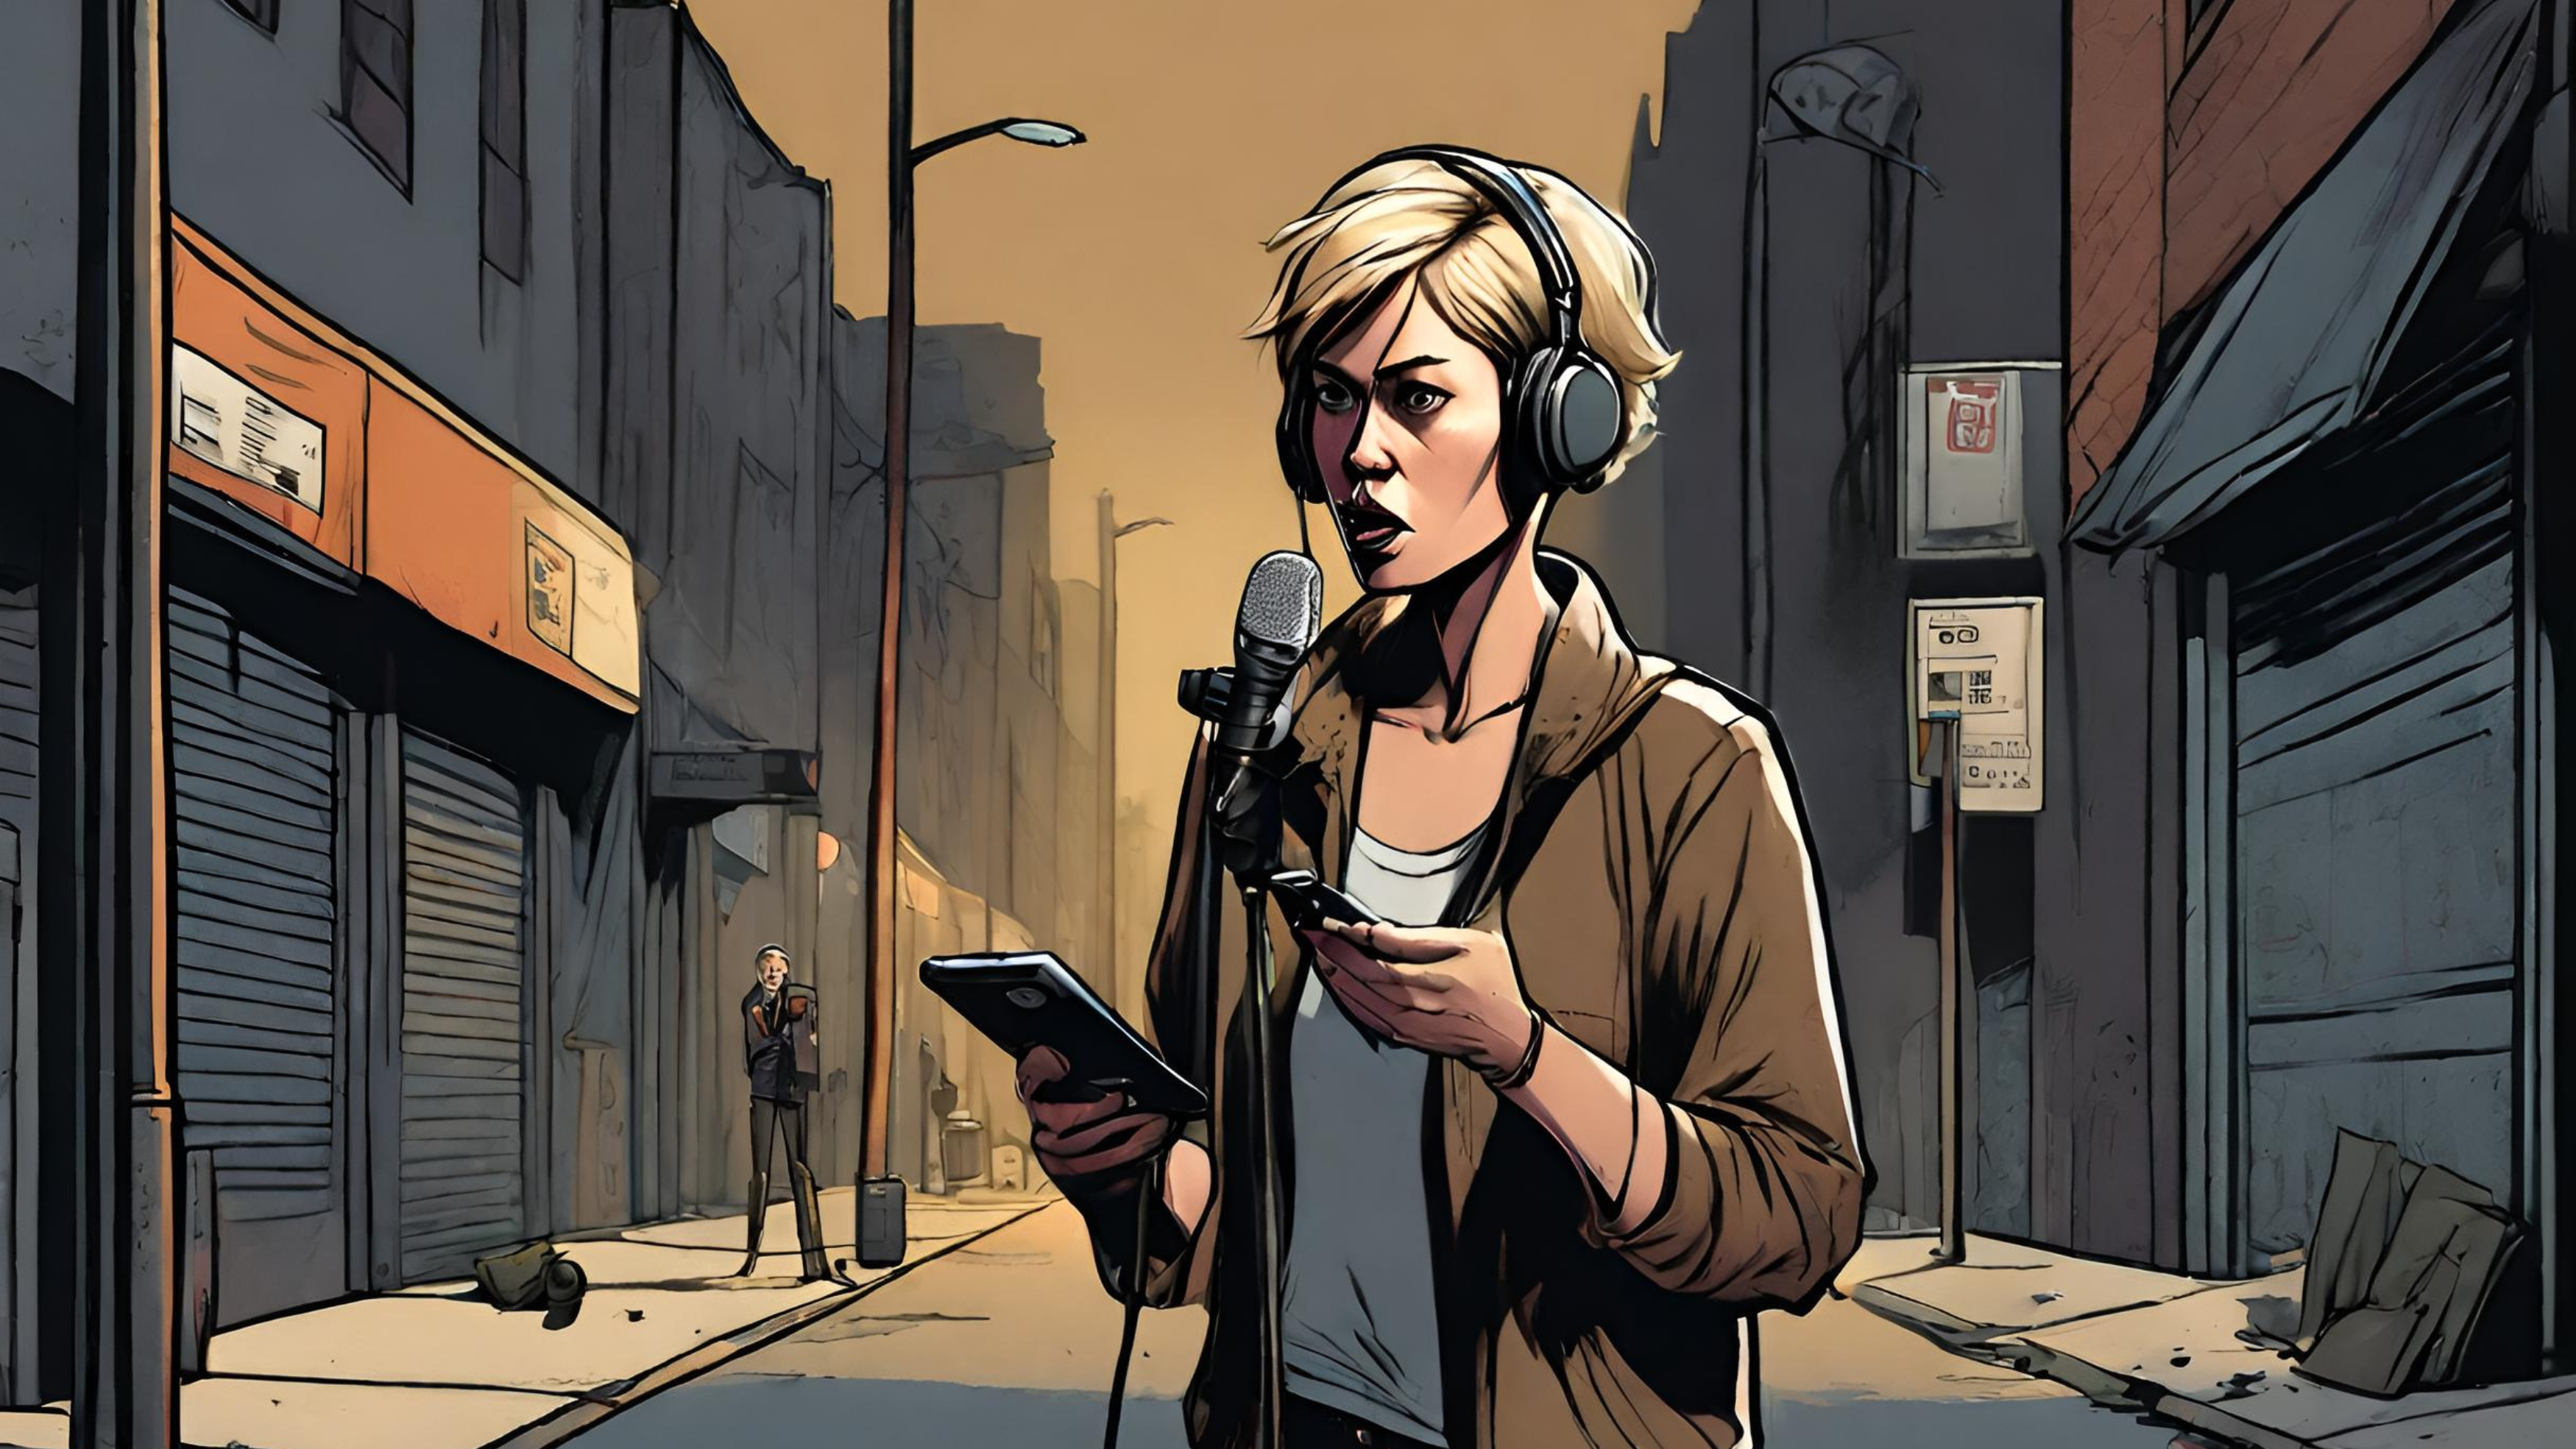 Concept art of female journalist doing an audio recording